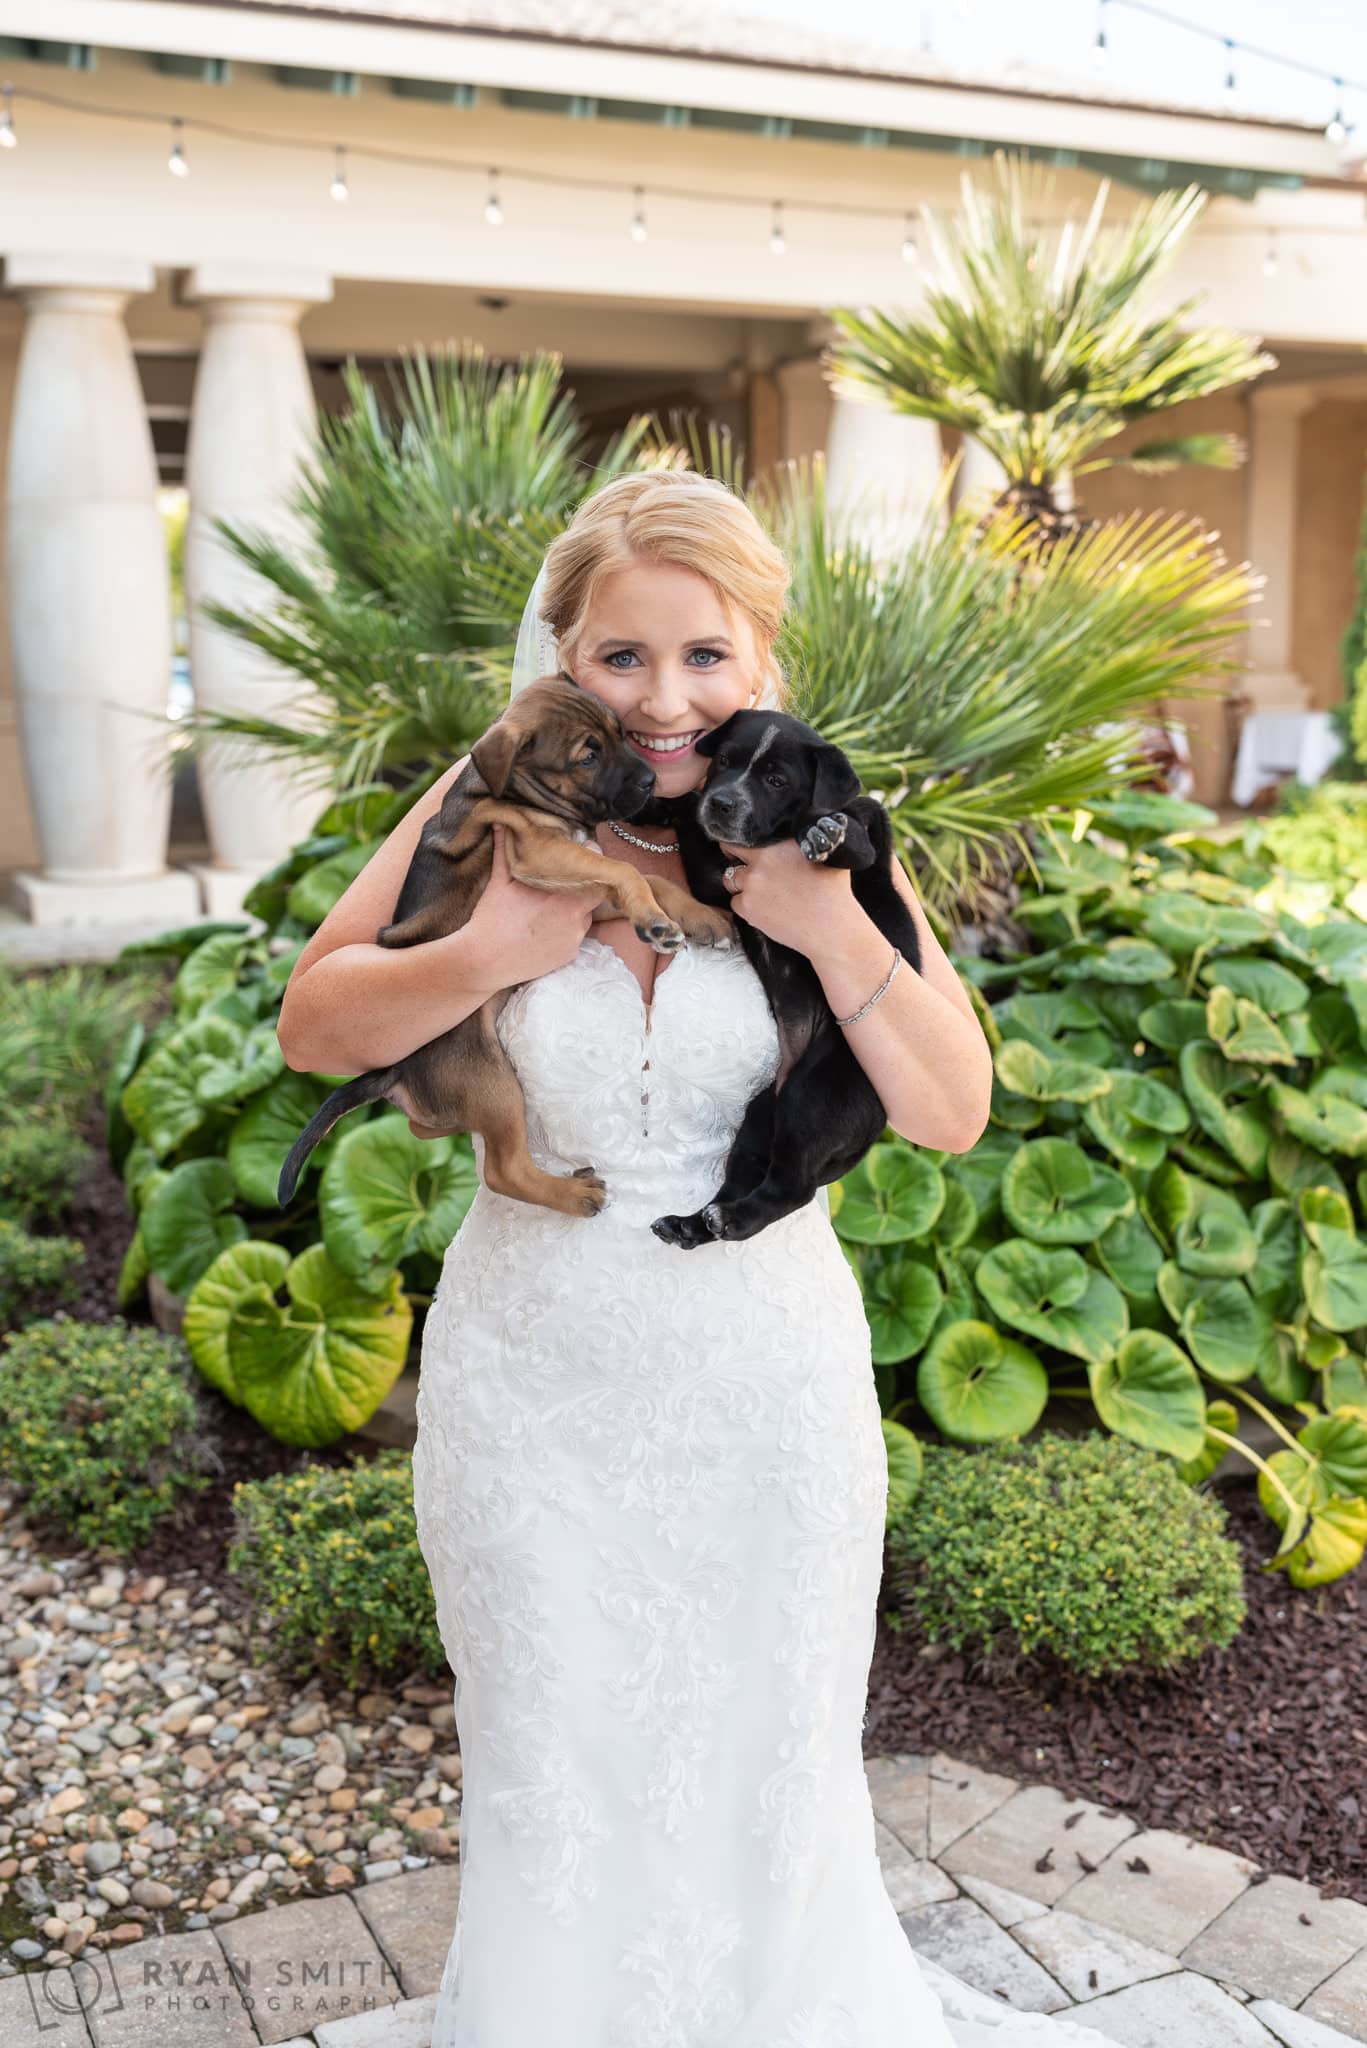 Bride holding two puppies - 21 Main Events - North Myrtle Beach